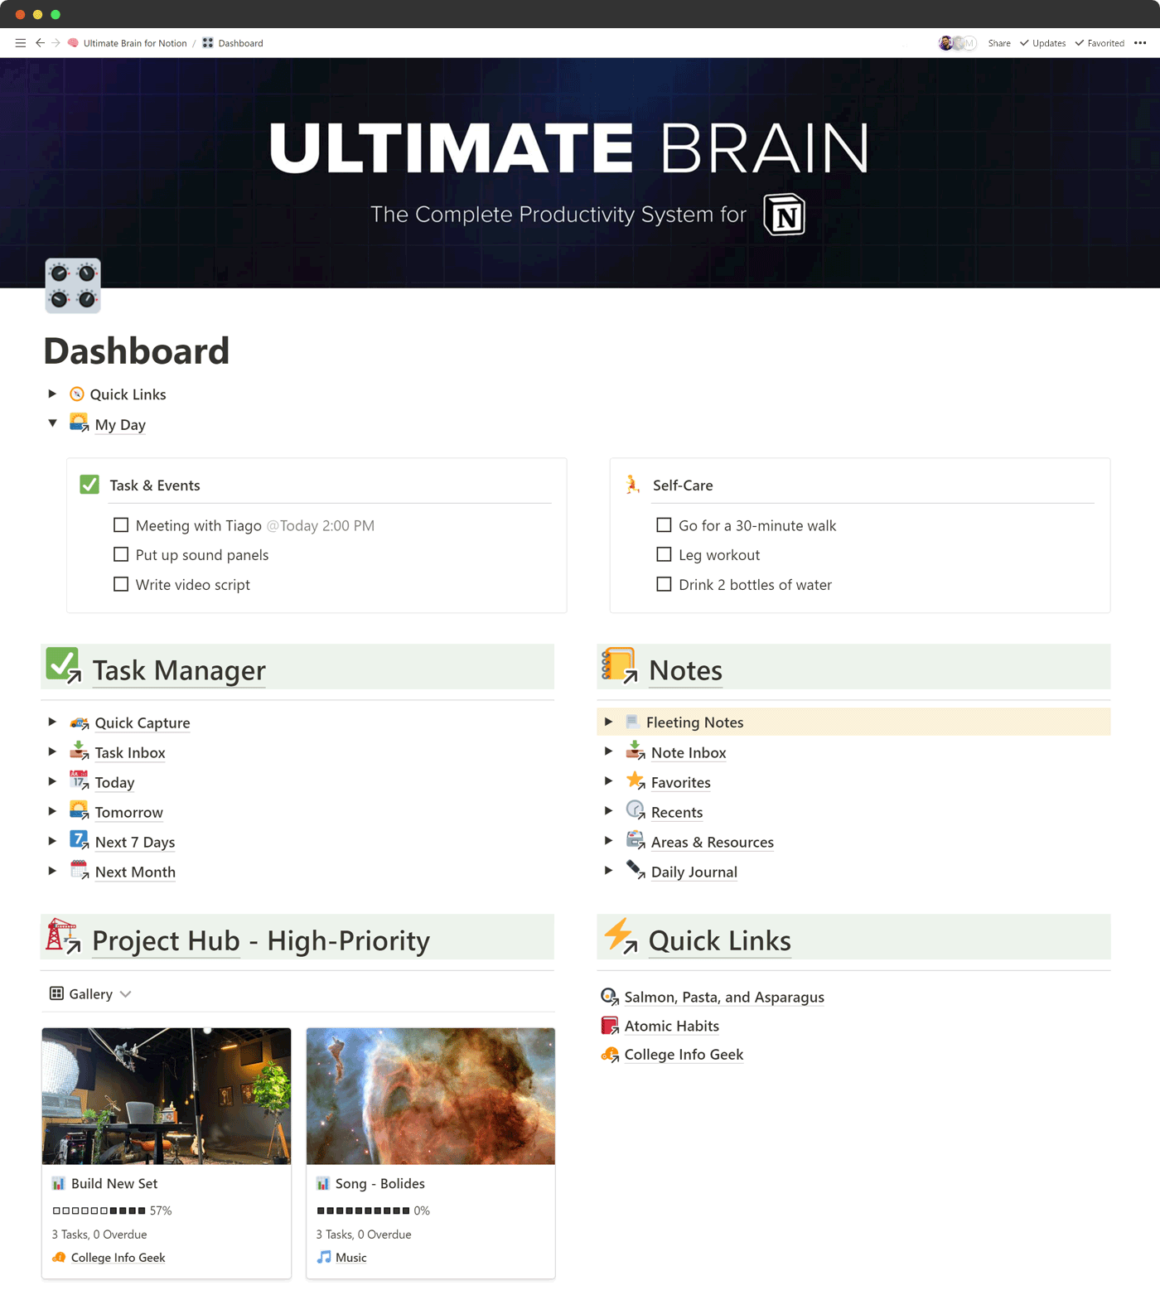 Ultimate Brain Notion Template by Thomas Frank